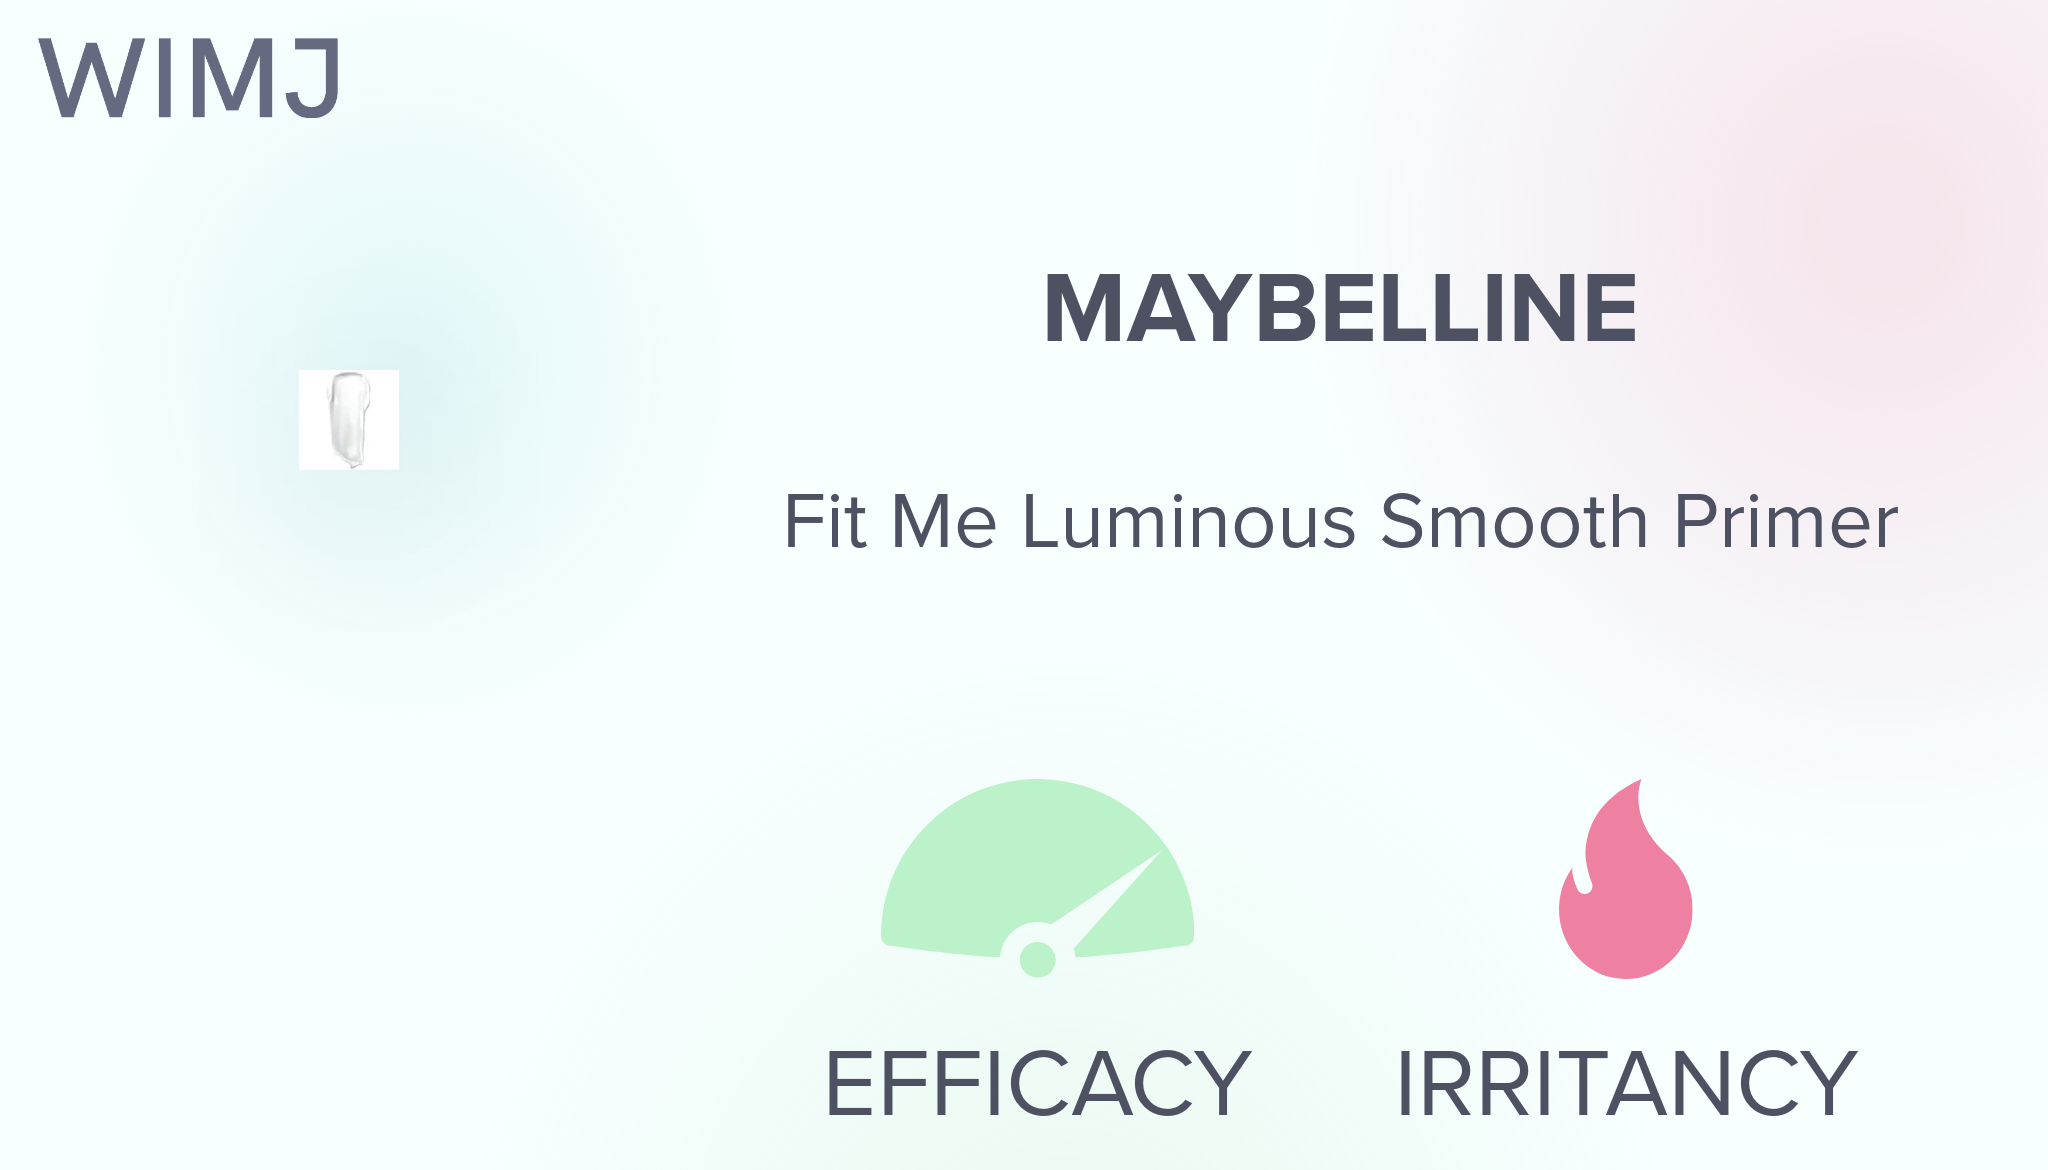 Me - Fit Primer - Luminous WIMJ Review: Maybelline Smooth